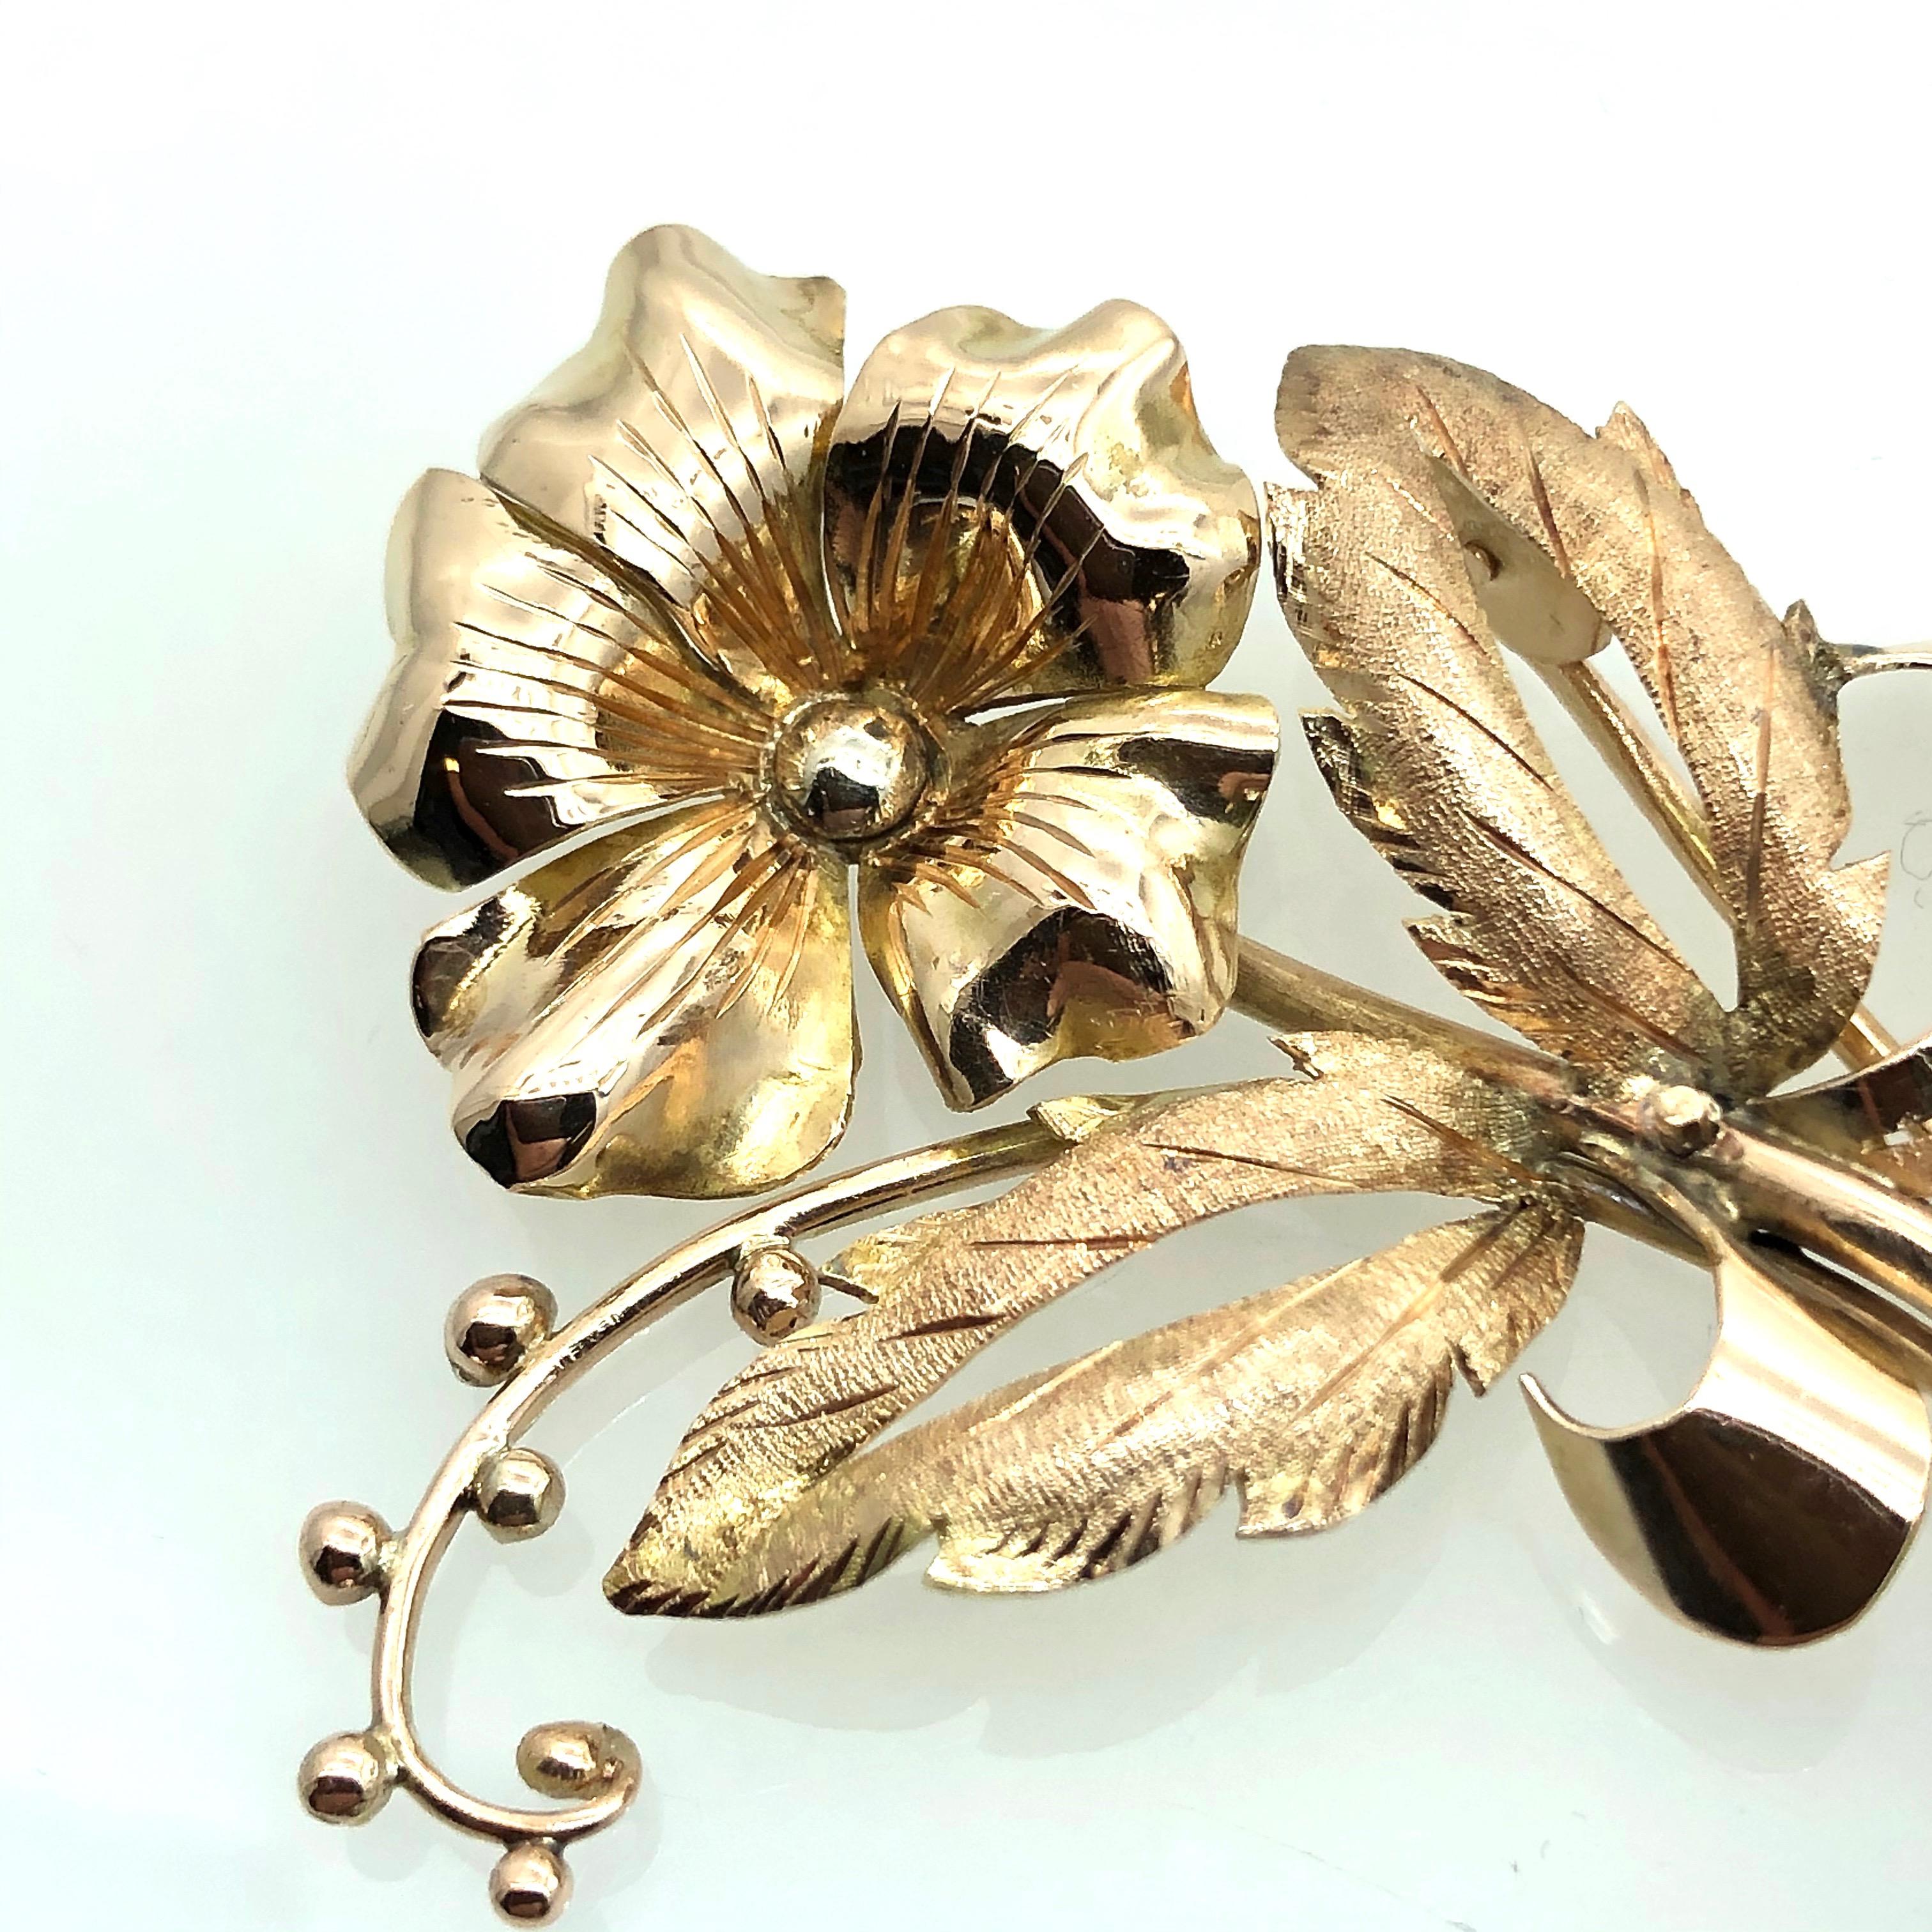 Tiffany Style Gold Flower Brooch in 14 carat yellow gold (tested), circa 1950.
Polished Flower motif with frosted leafs, hand made and hand engraved.
Measurements: 5.5 cm x 4.9 cm
Weight of the brooch is 8.8 grams



